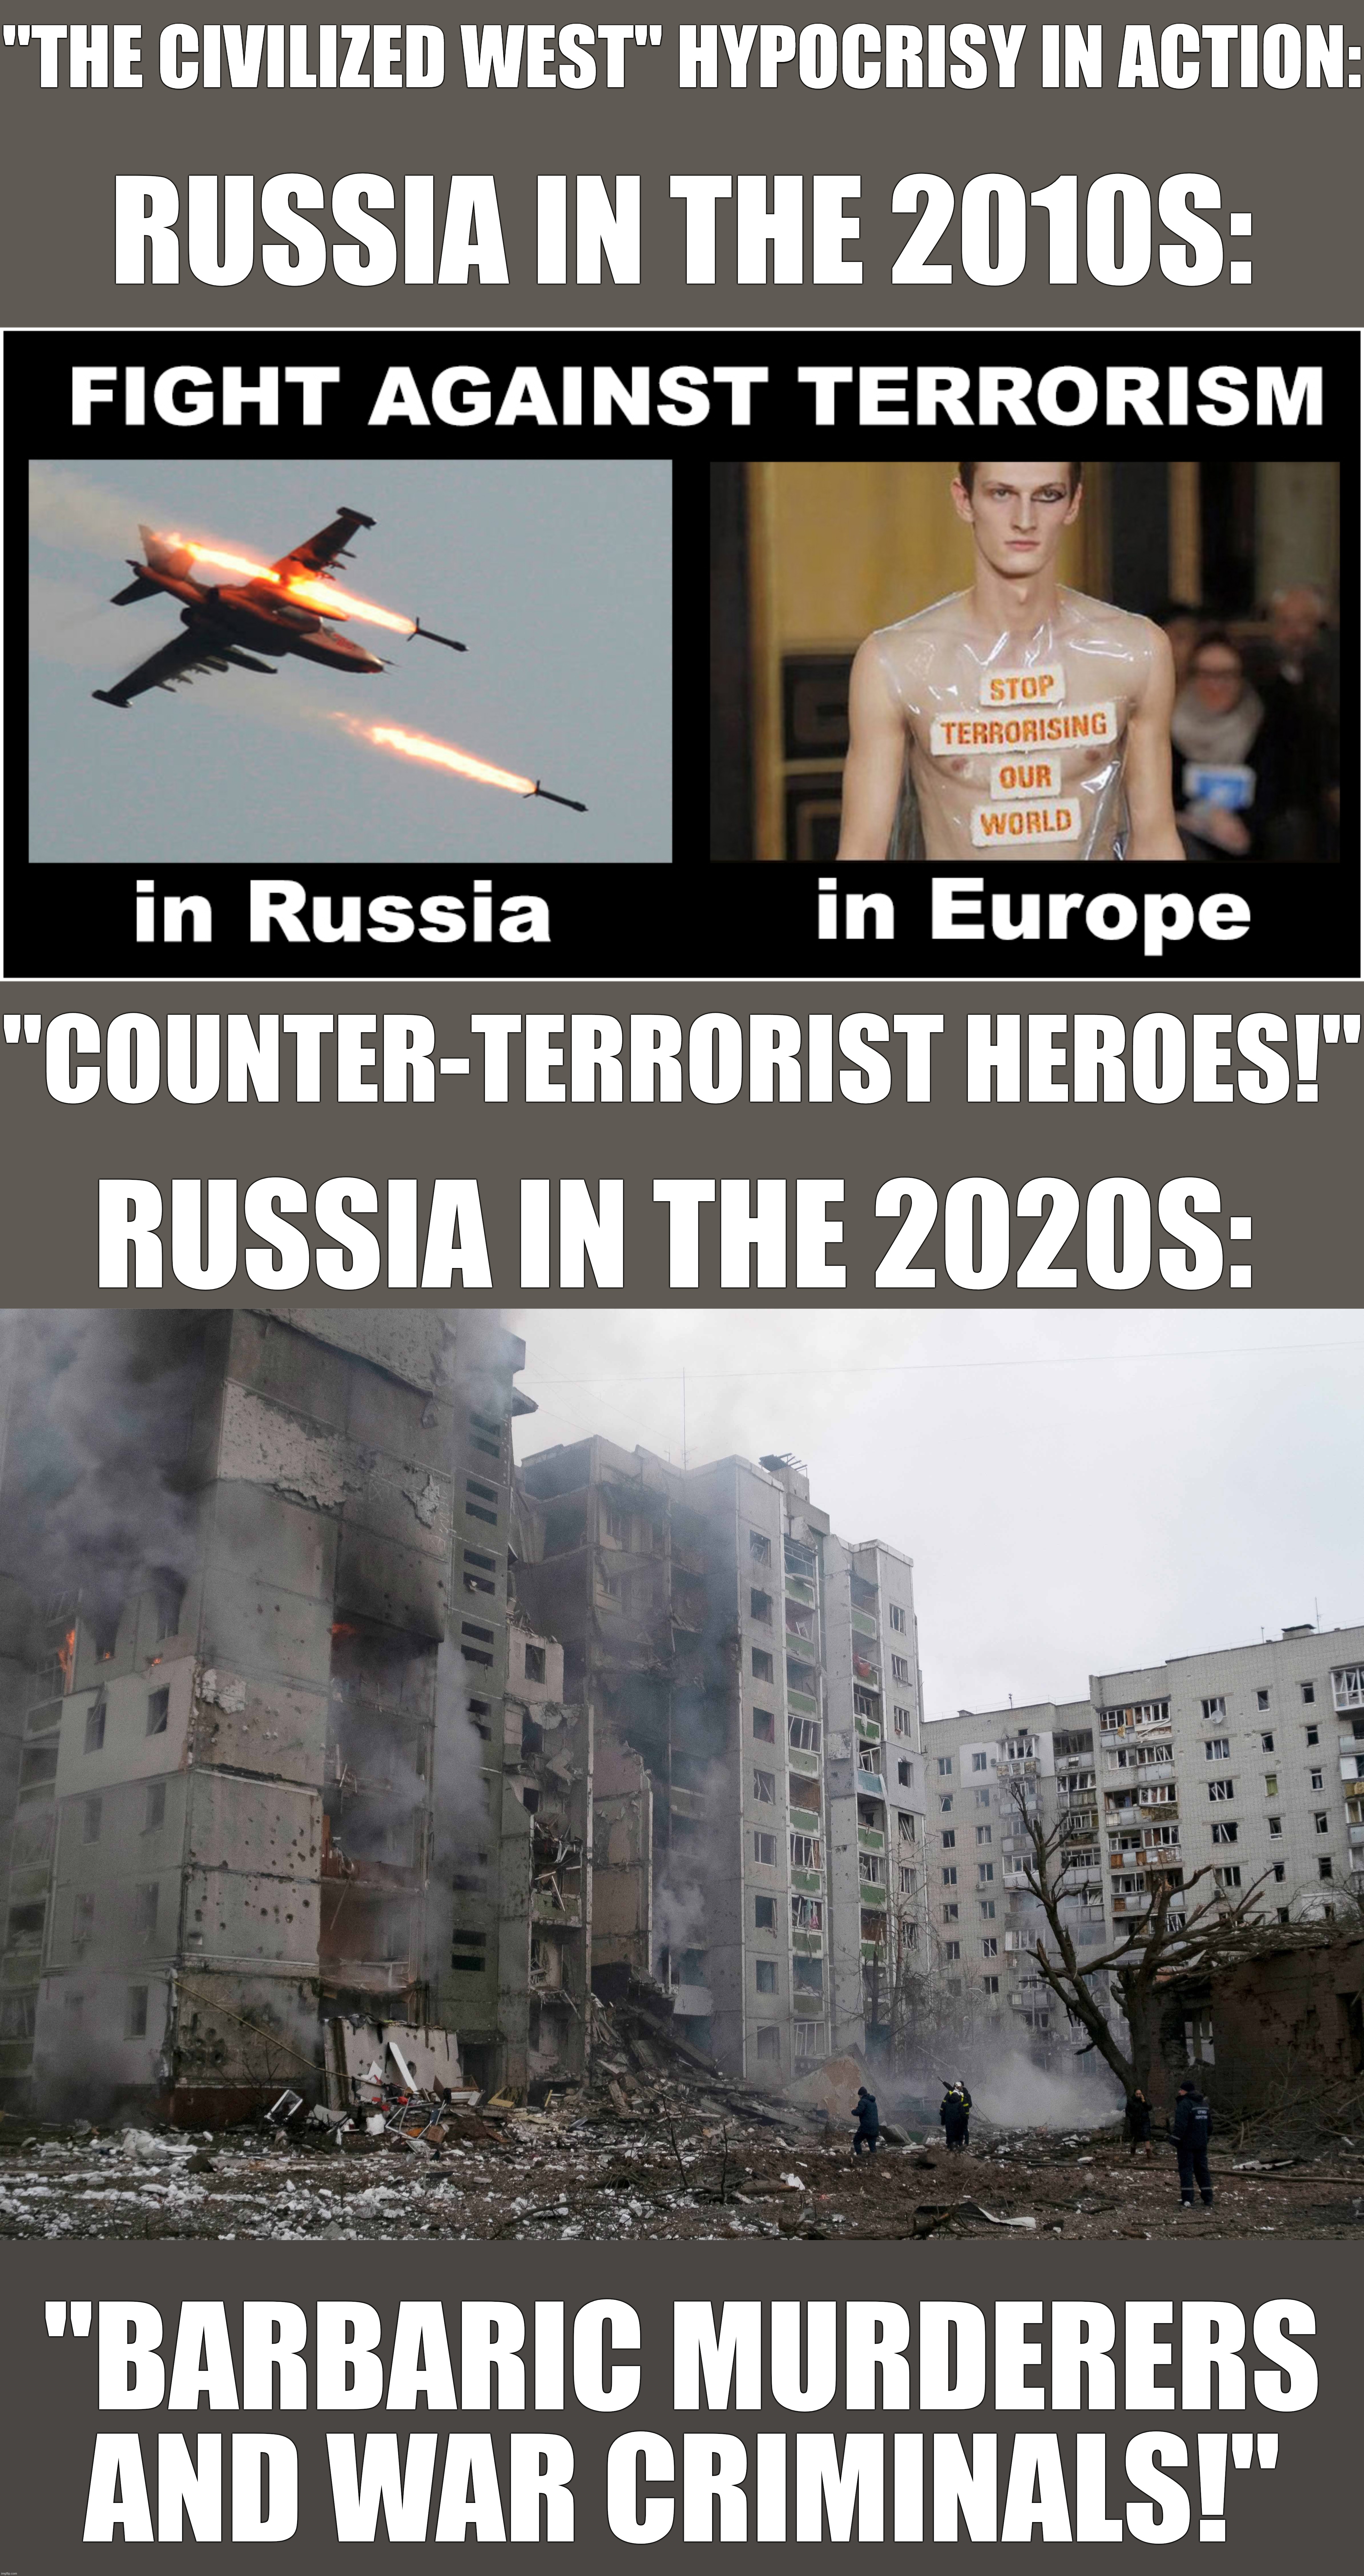 Remember When "the Civilized West" Considered Russia to be "Counter-Terrorist Heroes"? I Remember Very Well Too | "THE CIVILIZED WEST" HYPOCRISY IN ACTION:; RUSSIA IN THE 2010S:; "COUNTER-TERRORIST HEROES!"; RUSSIA IN THE 2020S:; "BARBARIC MURDERERS AND WAR CRIMINALS!" | image tagged in the civilized west,hypocrisy,double standards,double standard,russia,ukraine | made w/ Imgflip meme maker